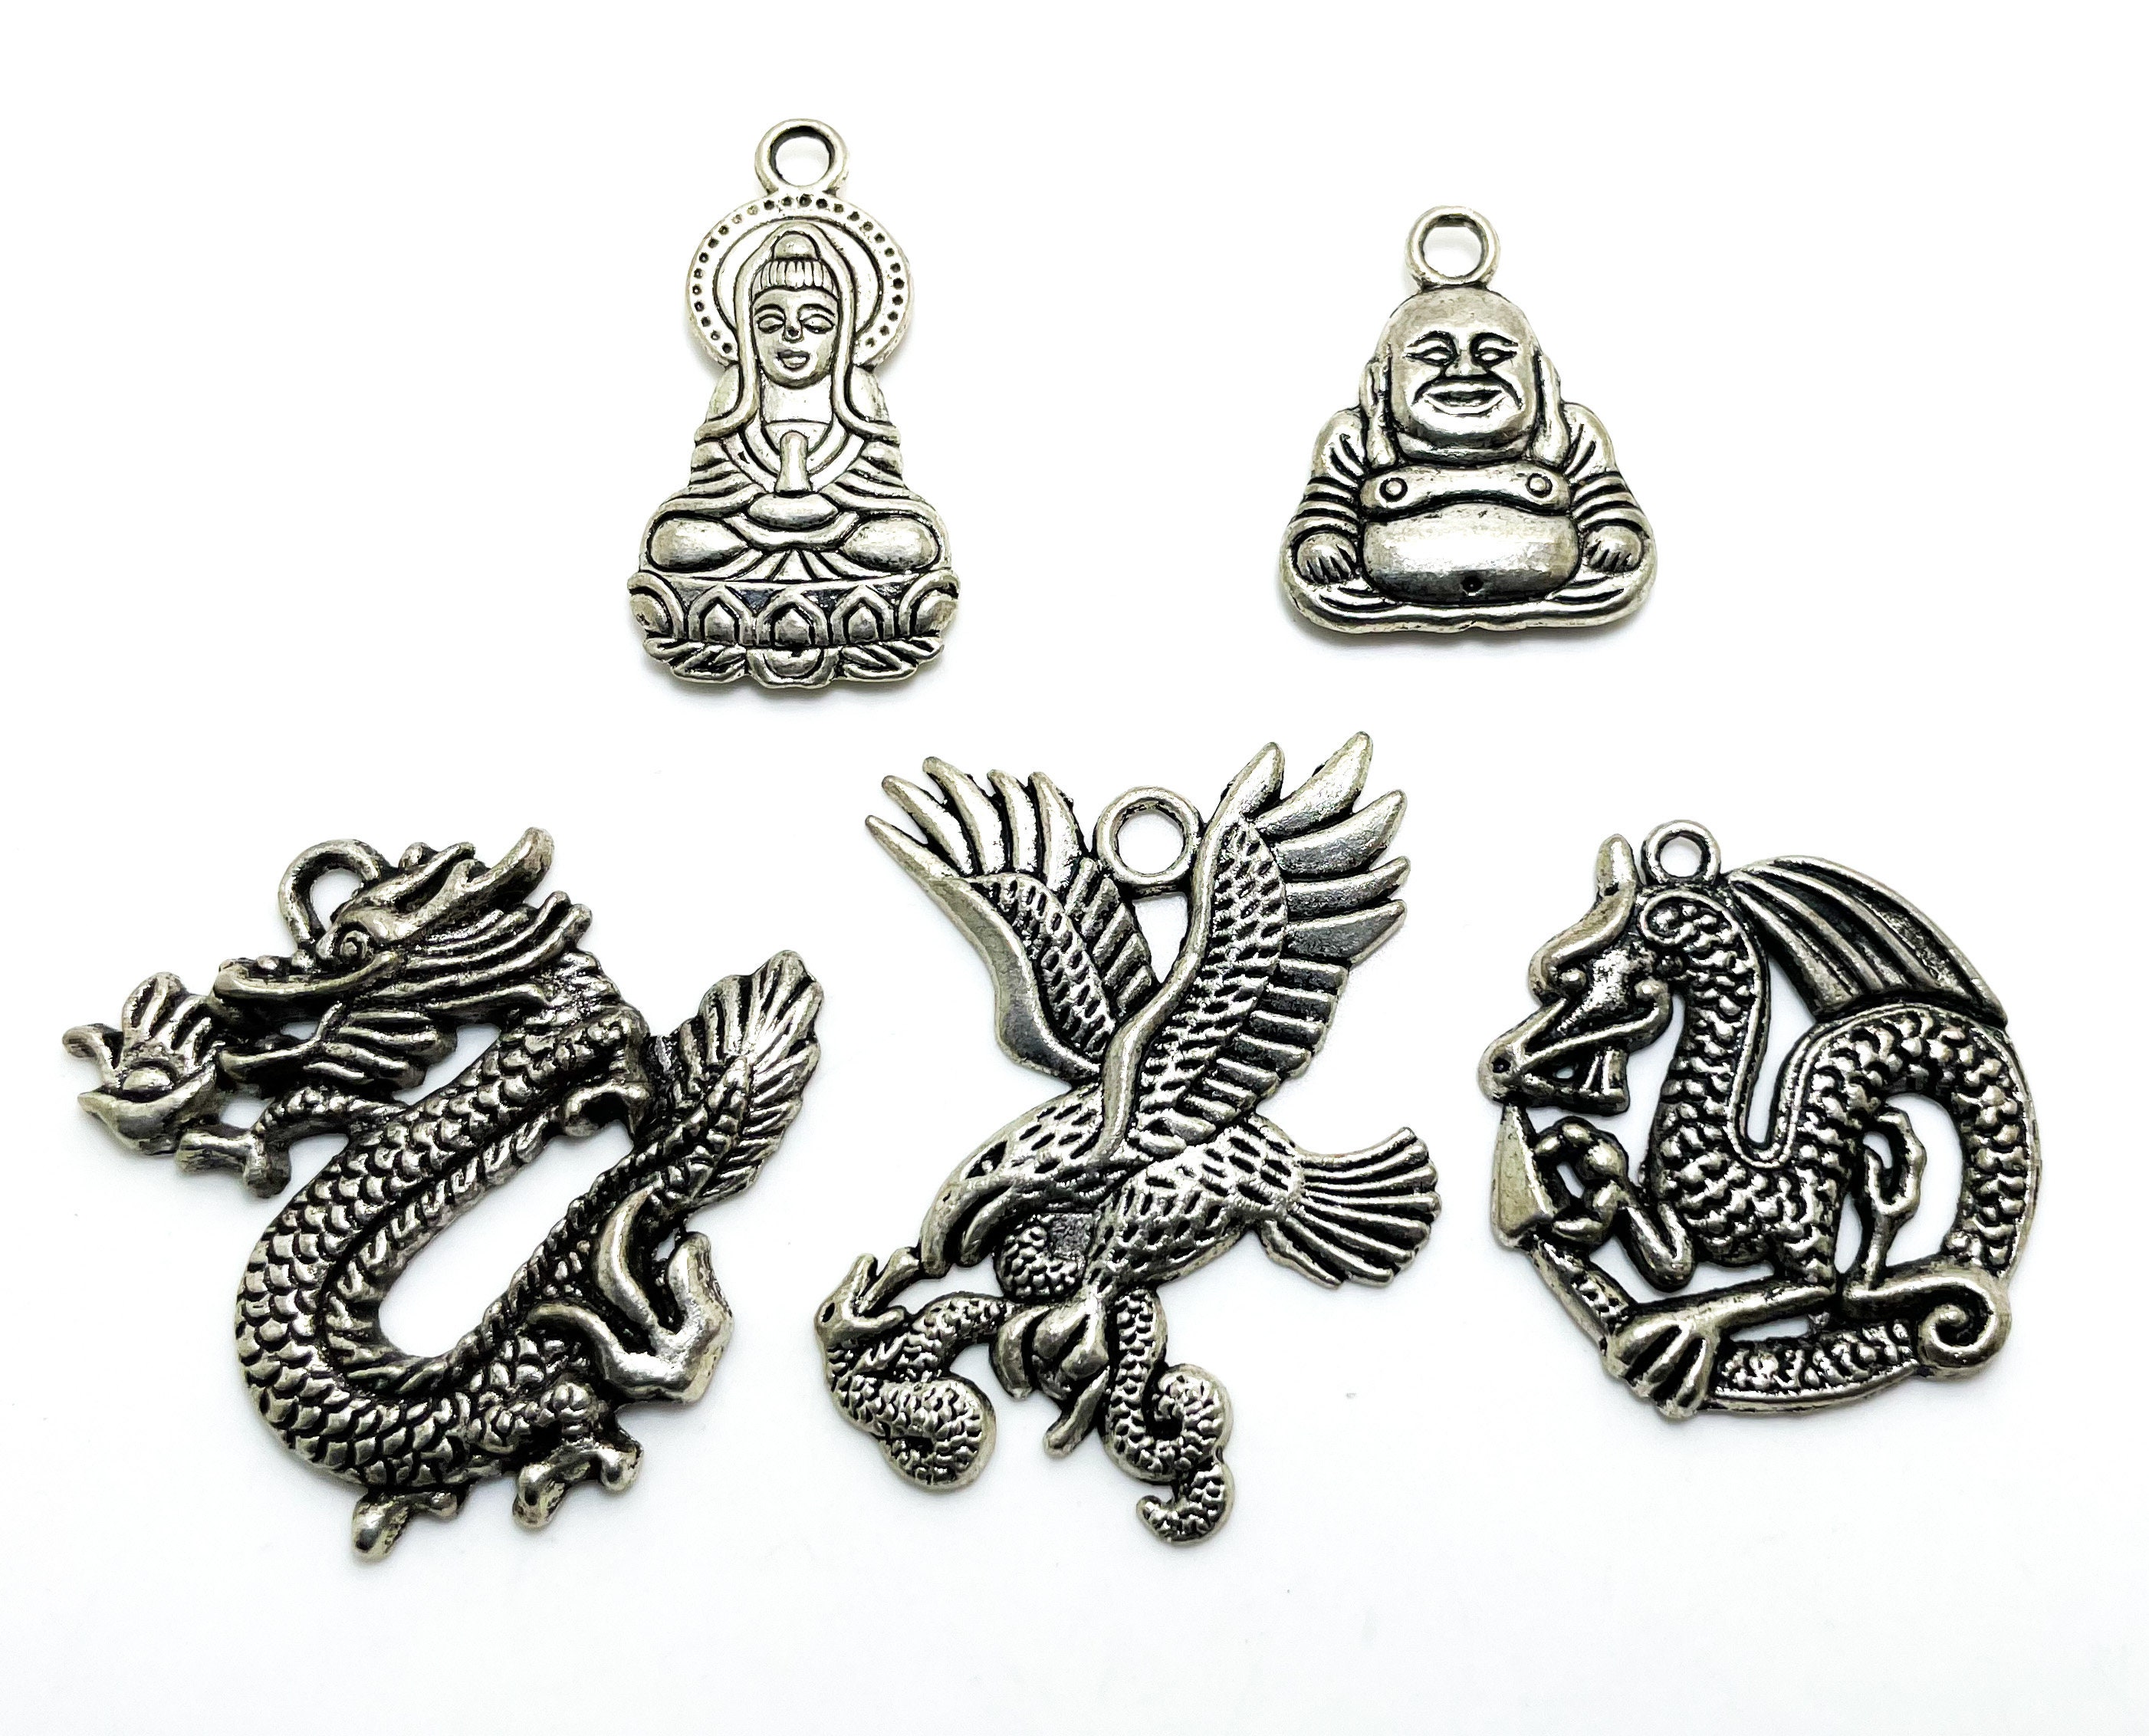 WYSIWYG 10pcs 14x17mm Antique Silver Color Double-Sided Chinese Dragon  Charms Pendant For DIY Jewelry Making